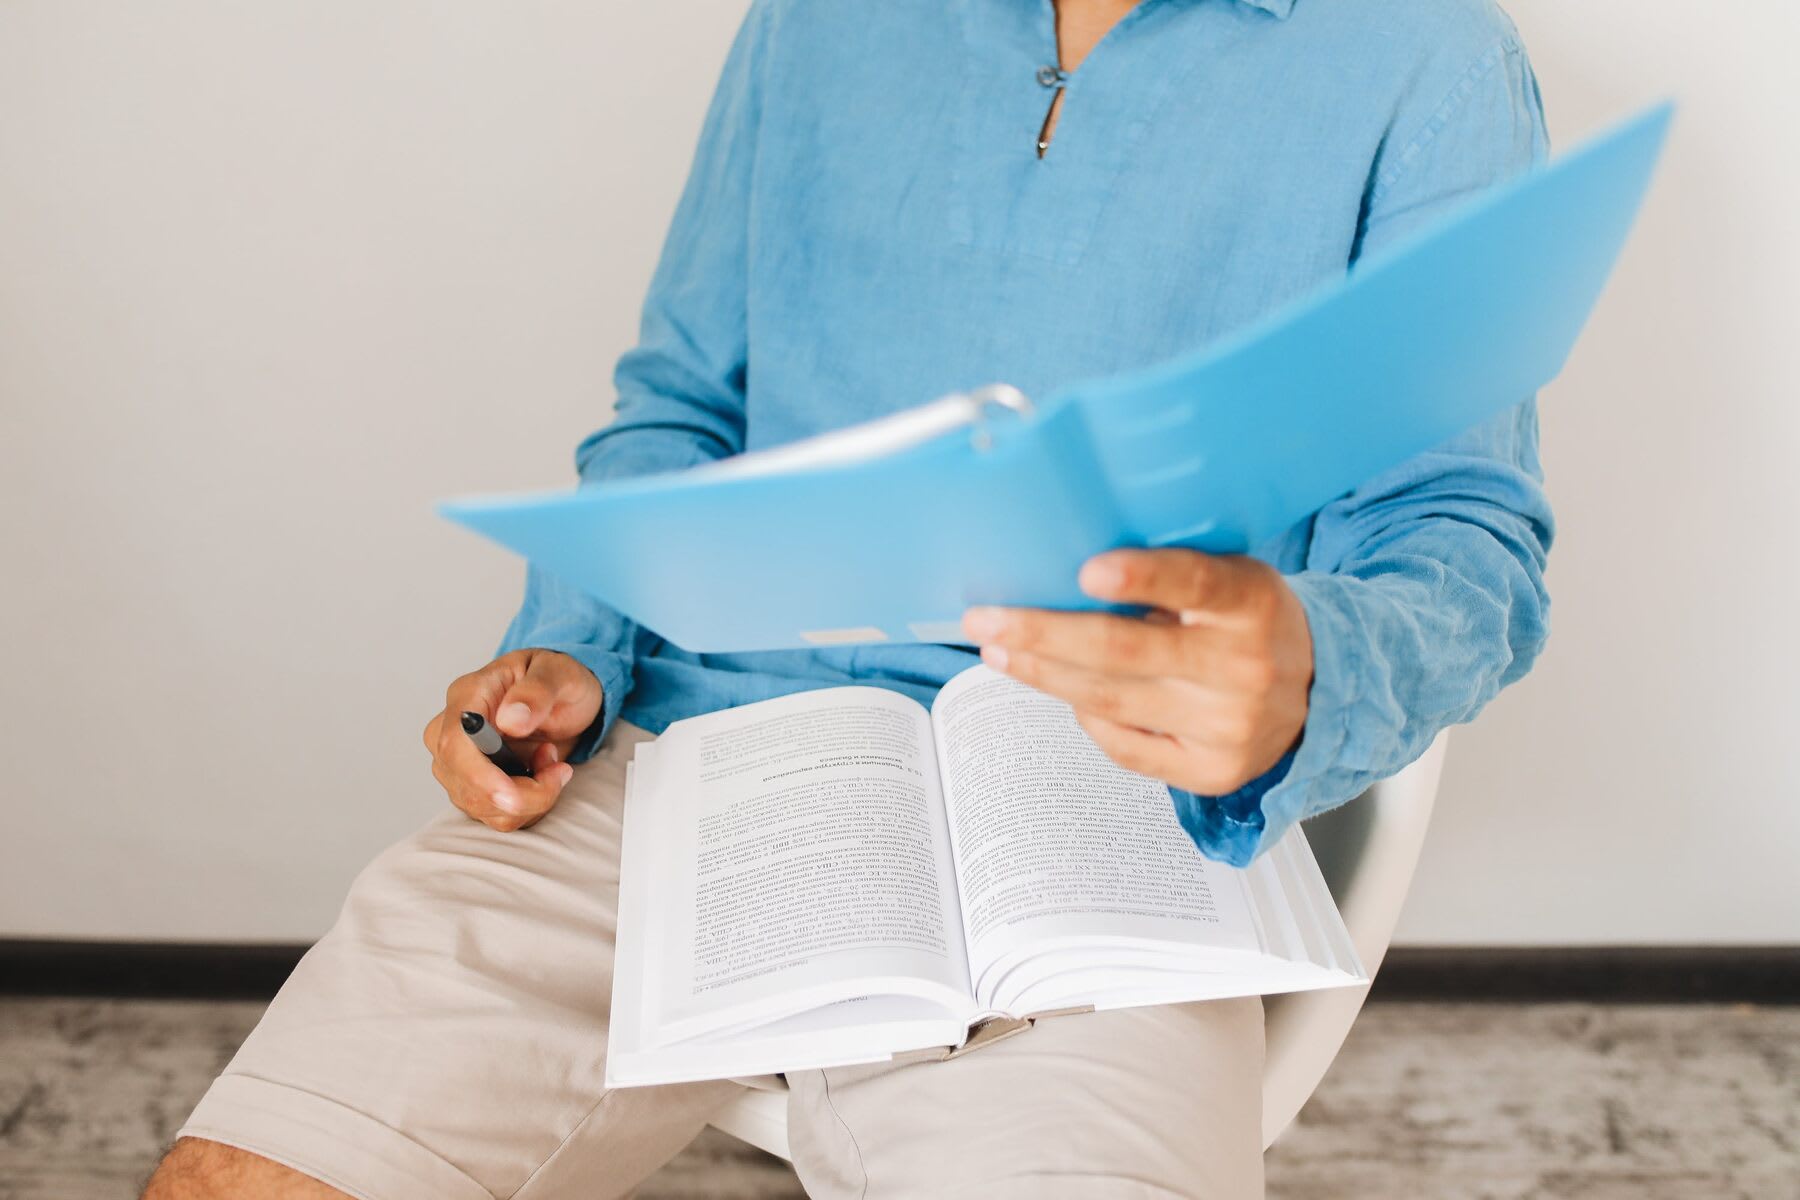 Man reading a blue folder while a text book is on his lap